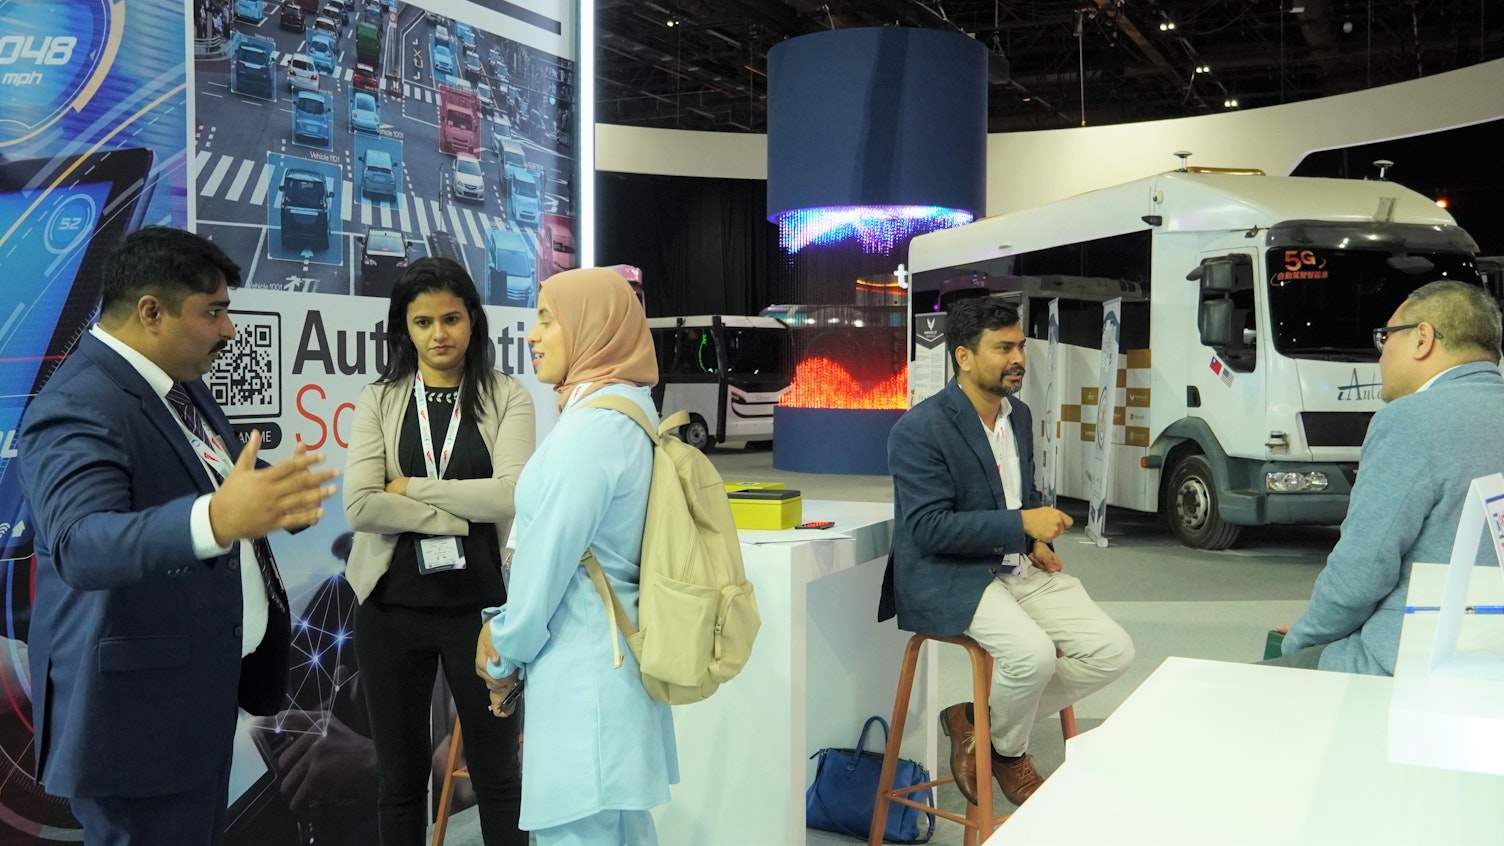 SGS Showcased Smart City Solutions at the Dubai World Congress for Self-Driving Transport